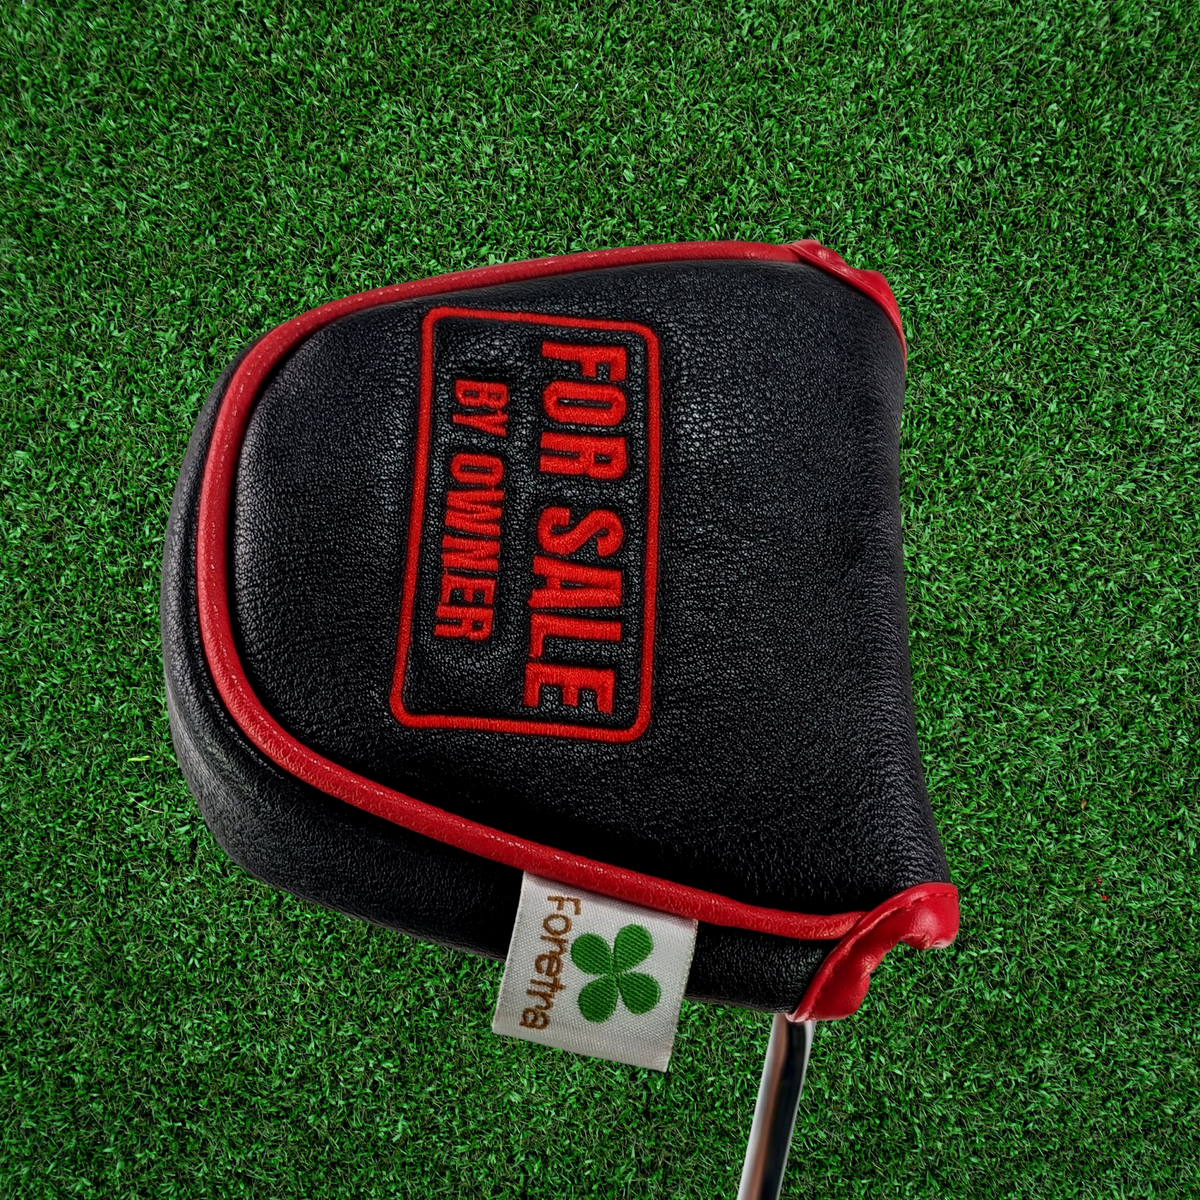 For Sale by Owner - MALLET Putter Headcover